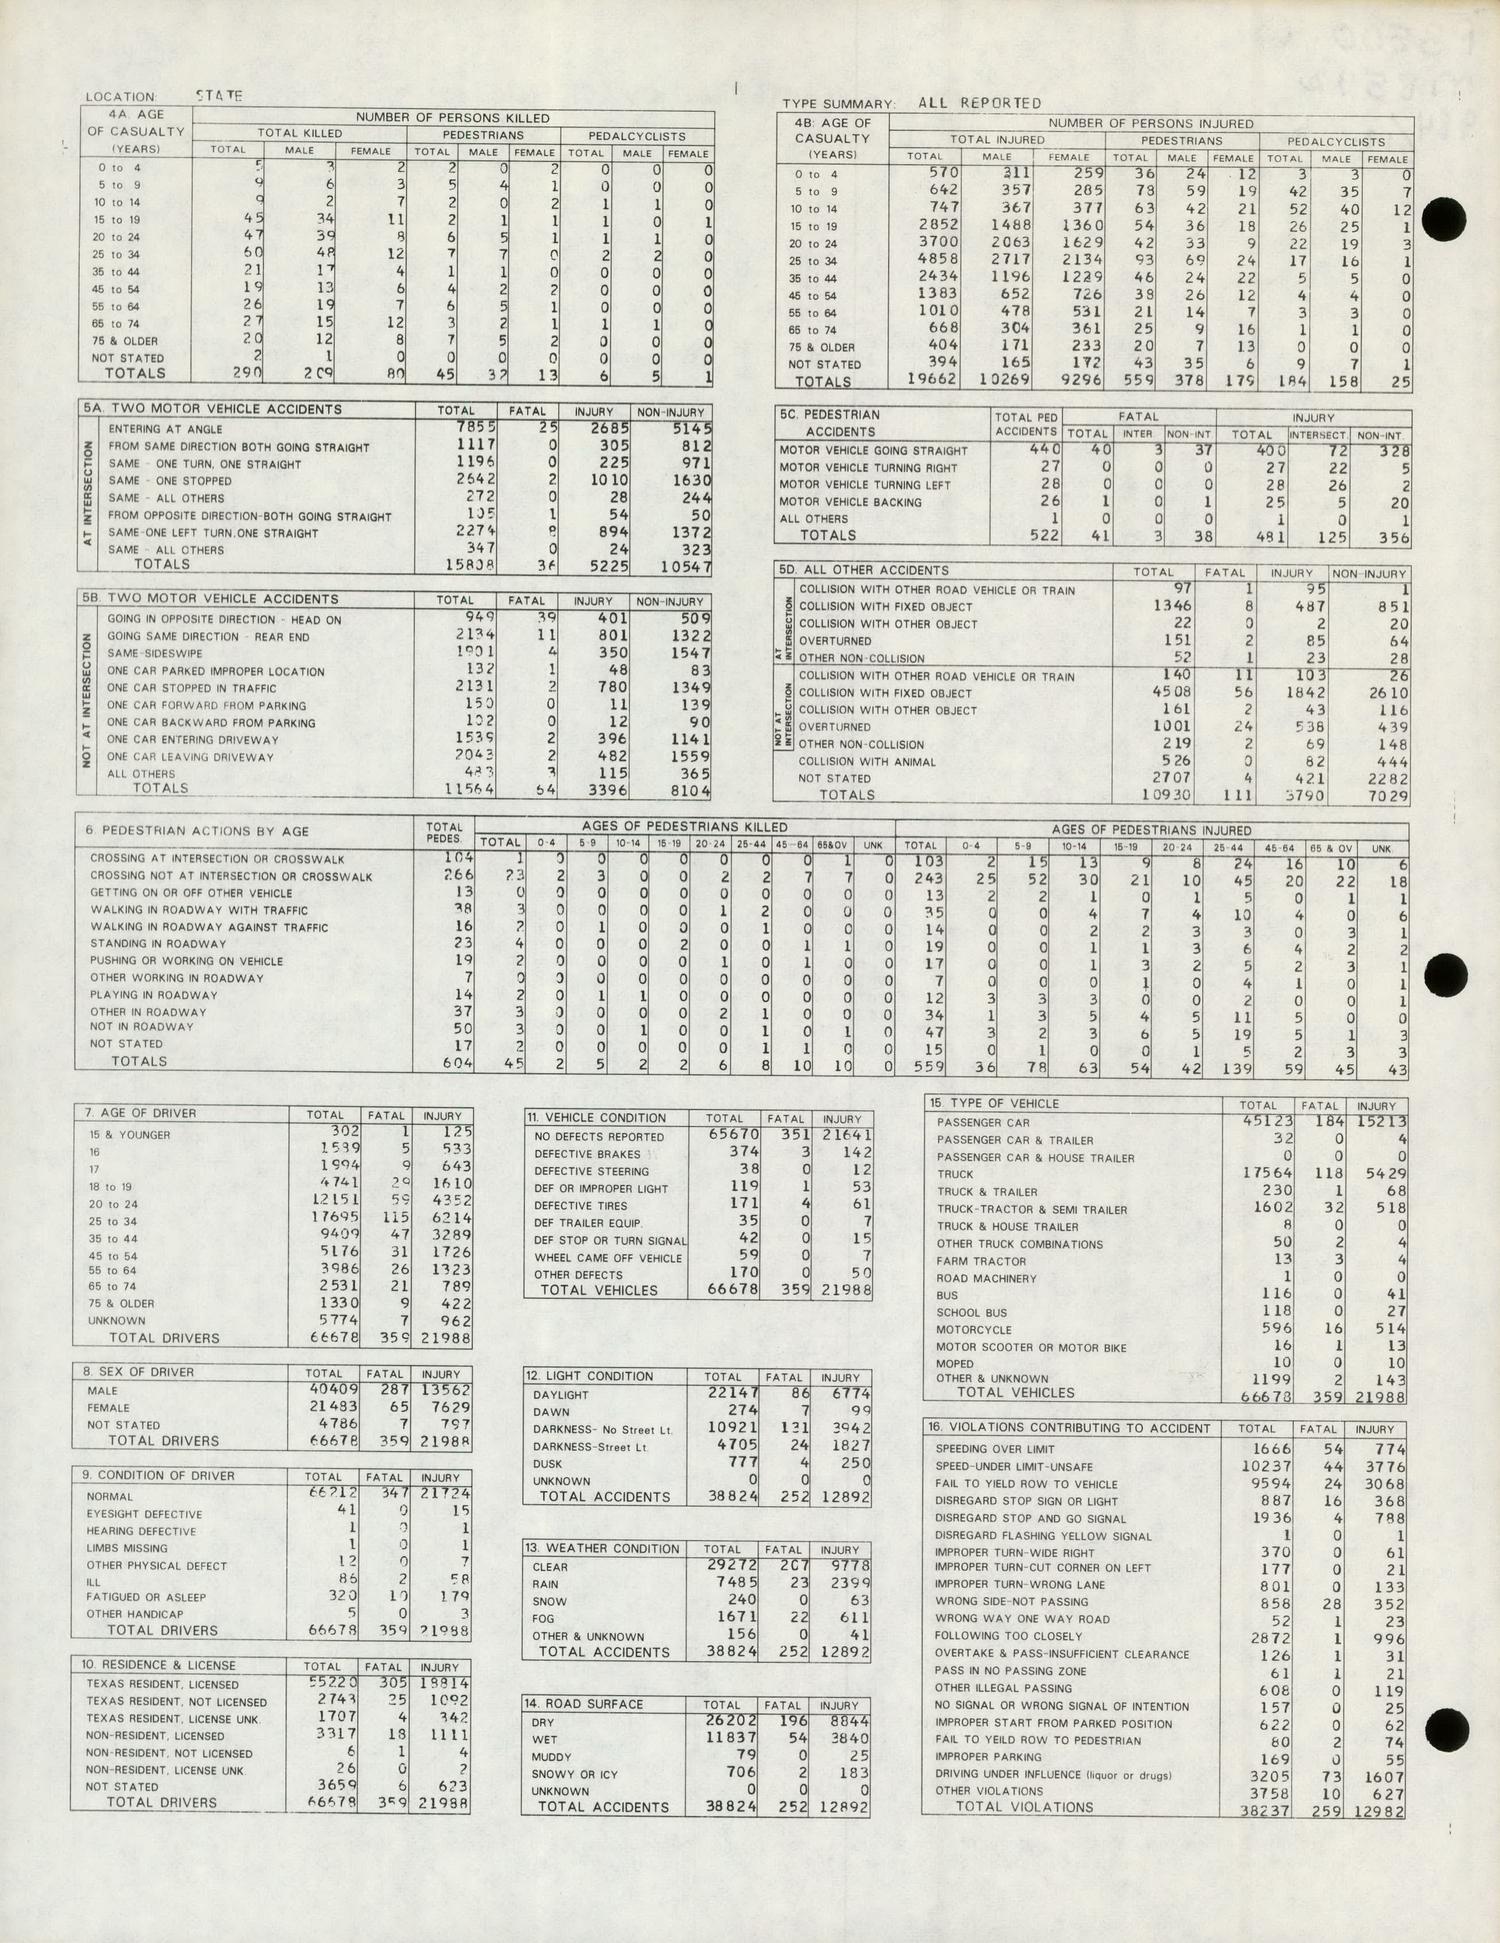 Summary of All Reported Accidents in the State of Texas for December 1984
                                                
                                                    BACK COVER
                                                